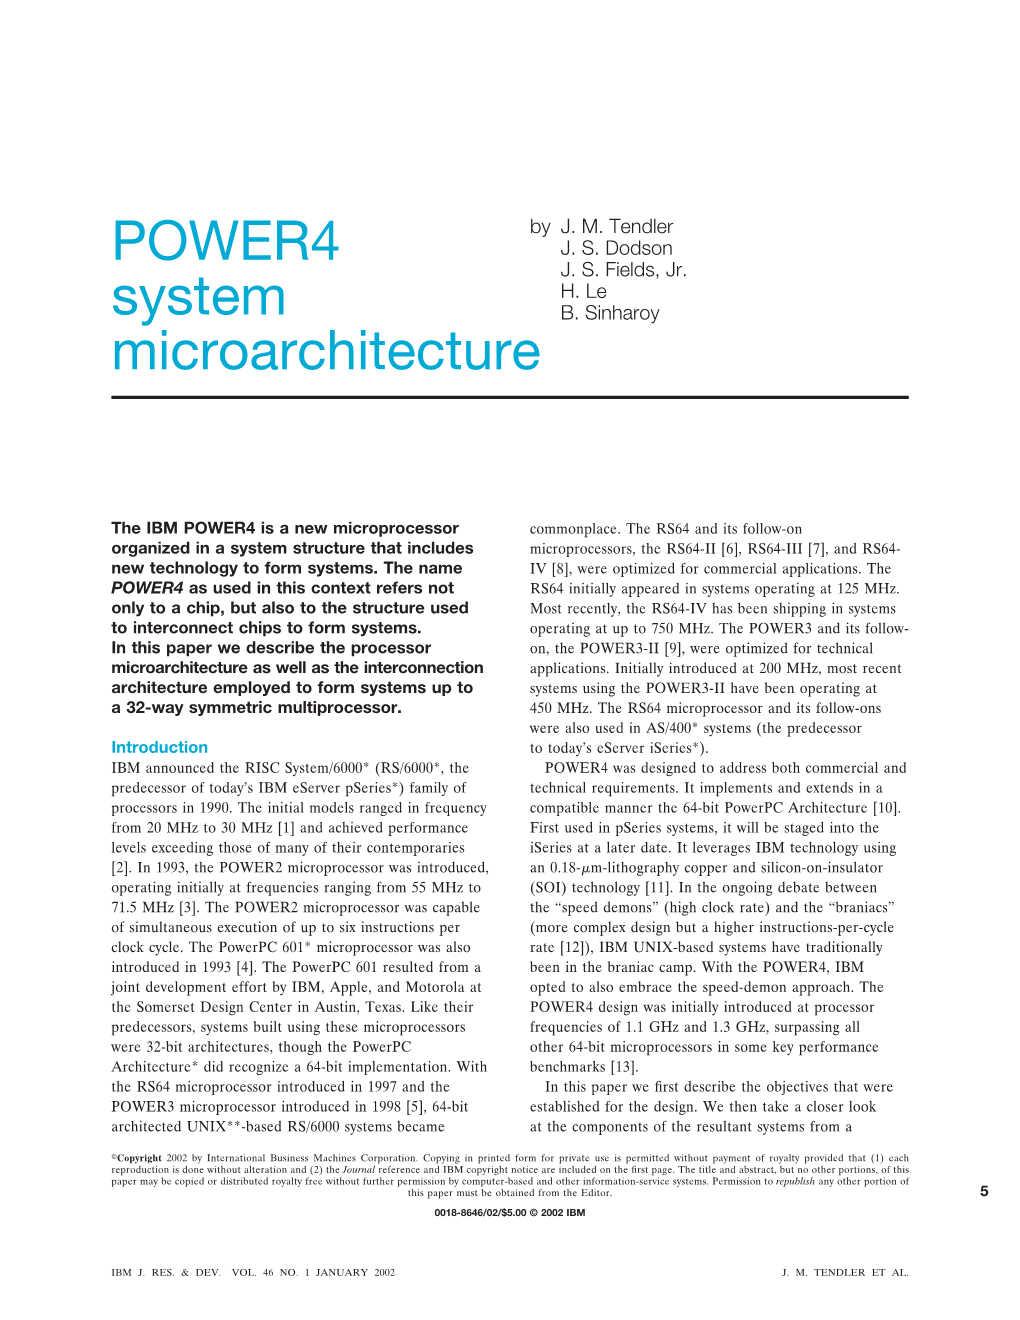 POWER4 System Microarchitecture